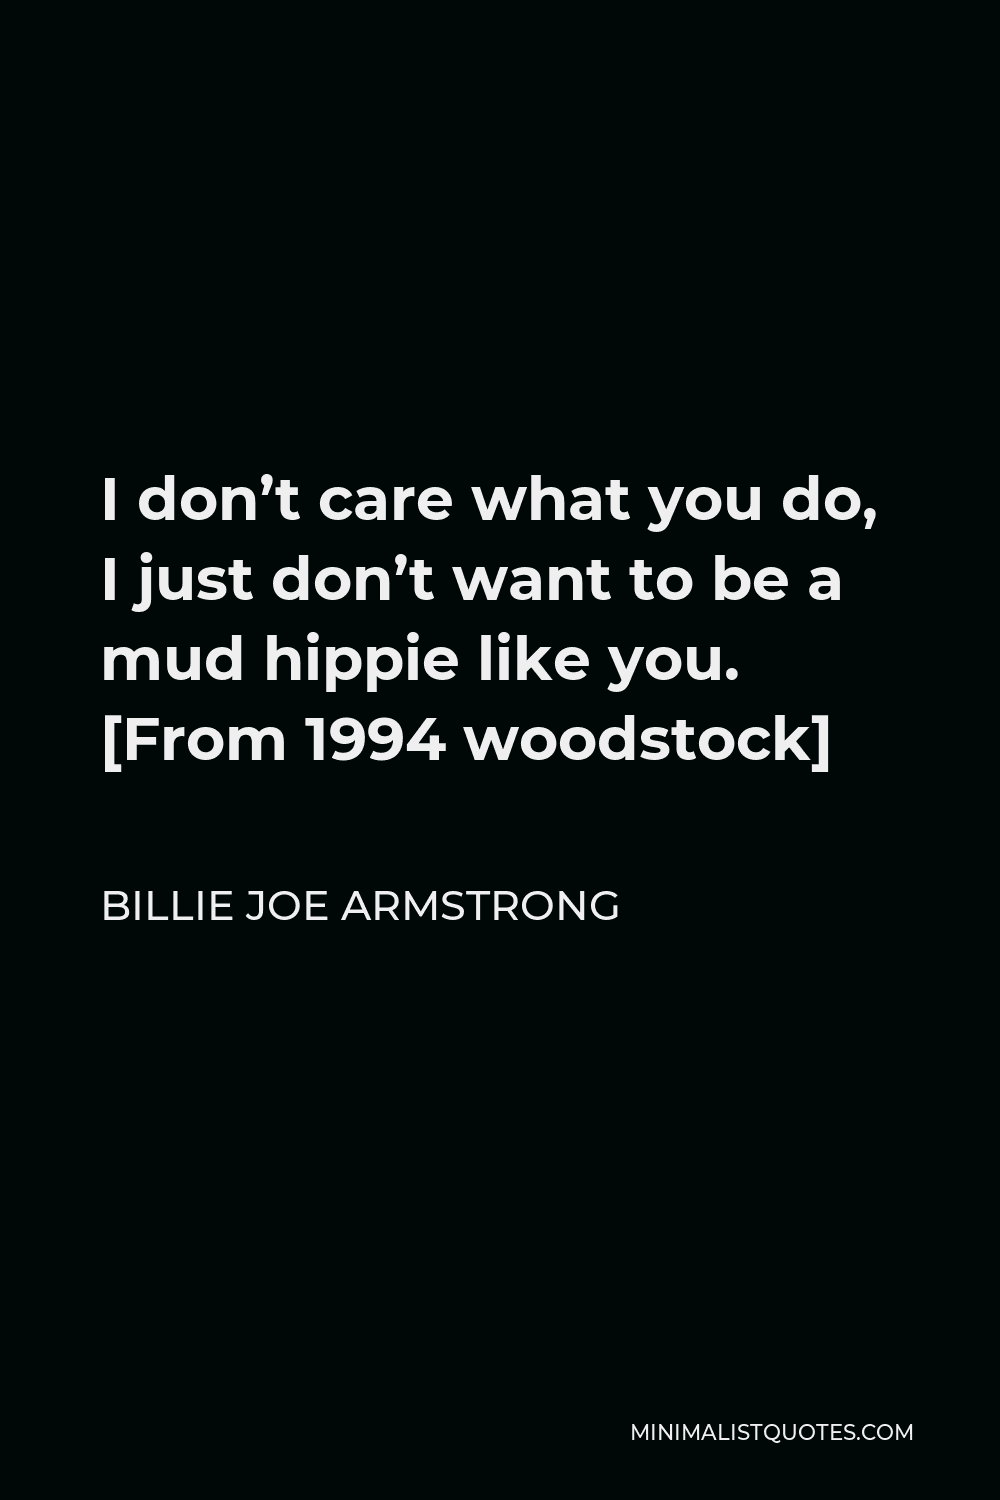 Billie Joe Armstrong Quote - I don’t care what you do, I just don’t want to be a mud hippie like you. [From 1994 woodstock]